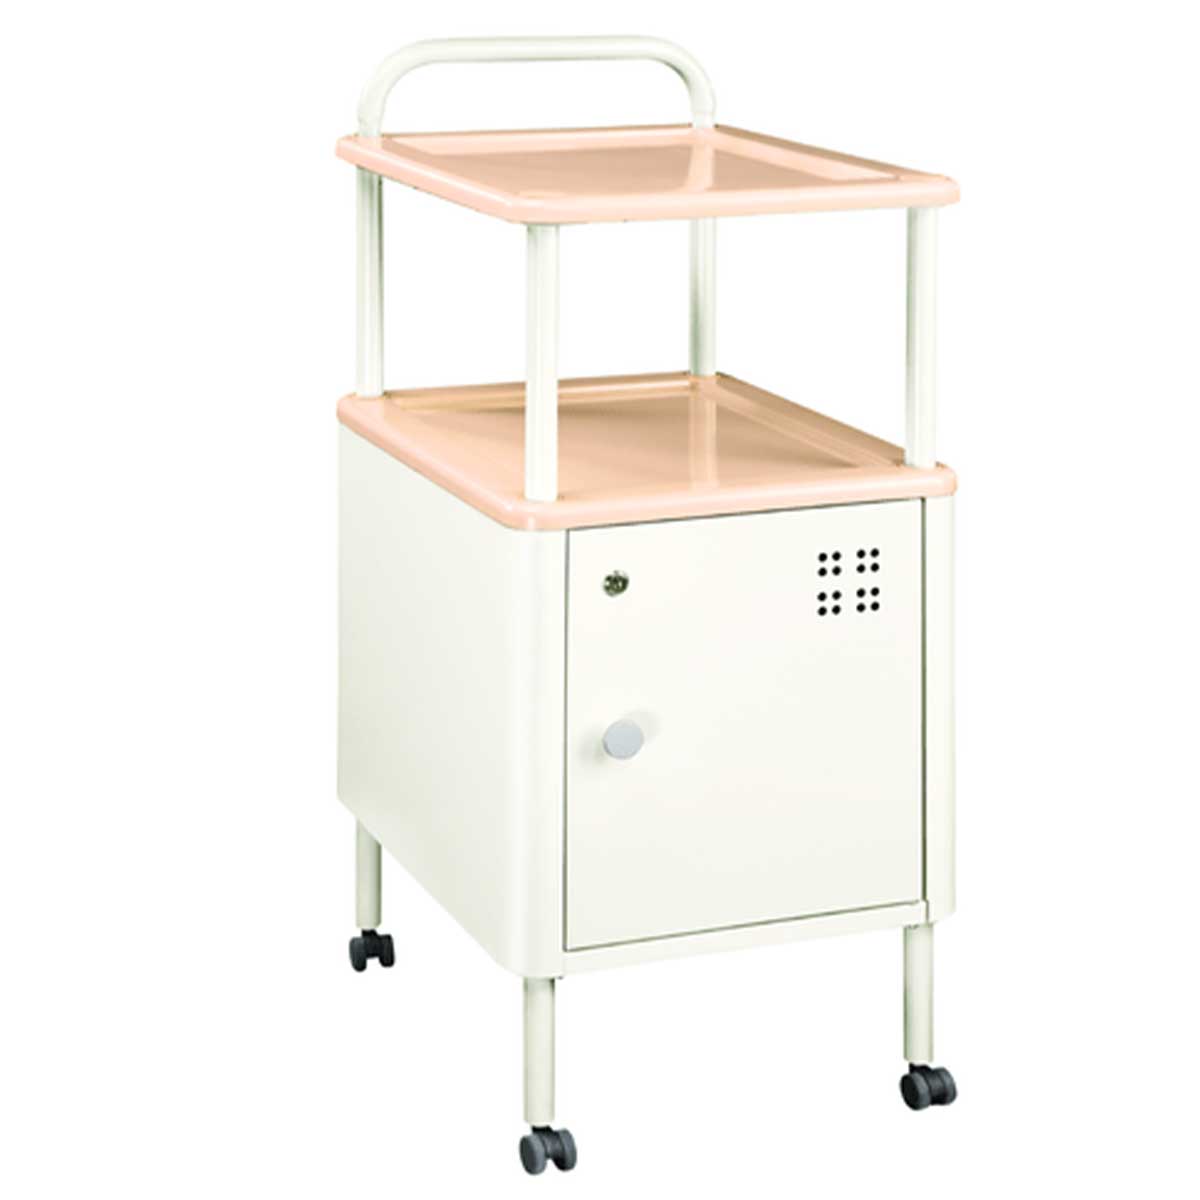 Laboratory Table Manufacturers, Suppliers in Rajouri Garden